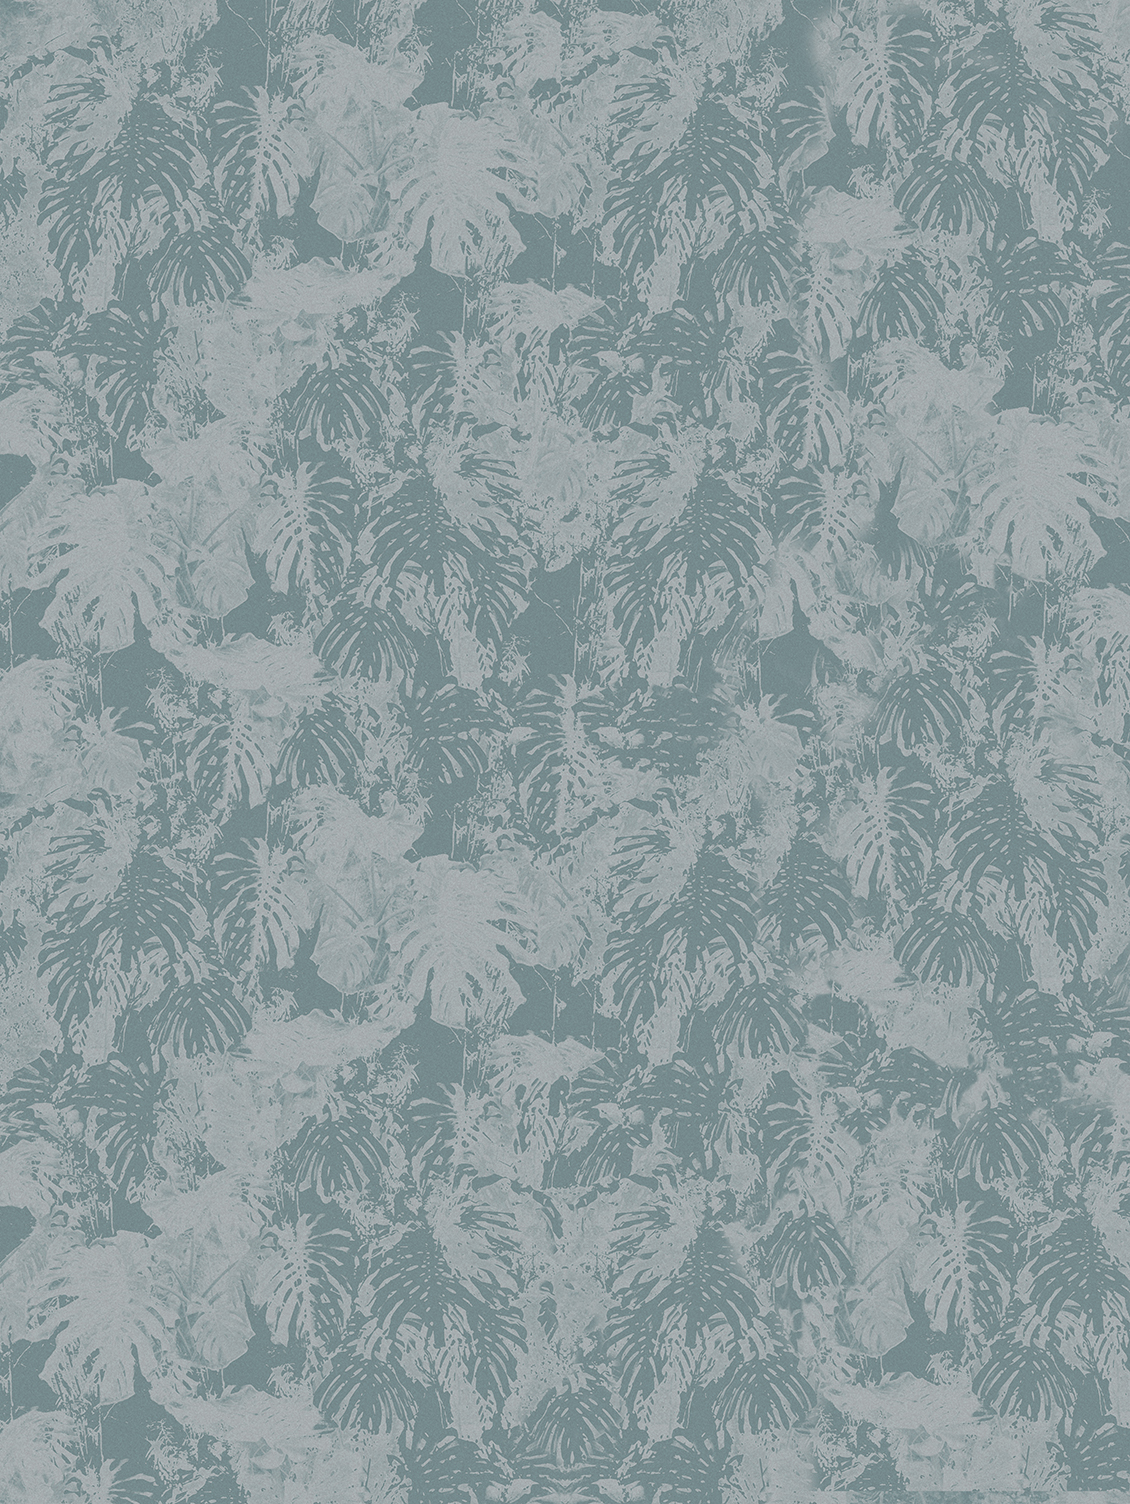 Wallpaper in shades of light blue with texture of tropical leaves, fabric effect